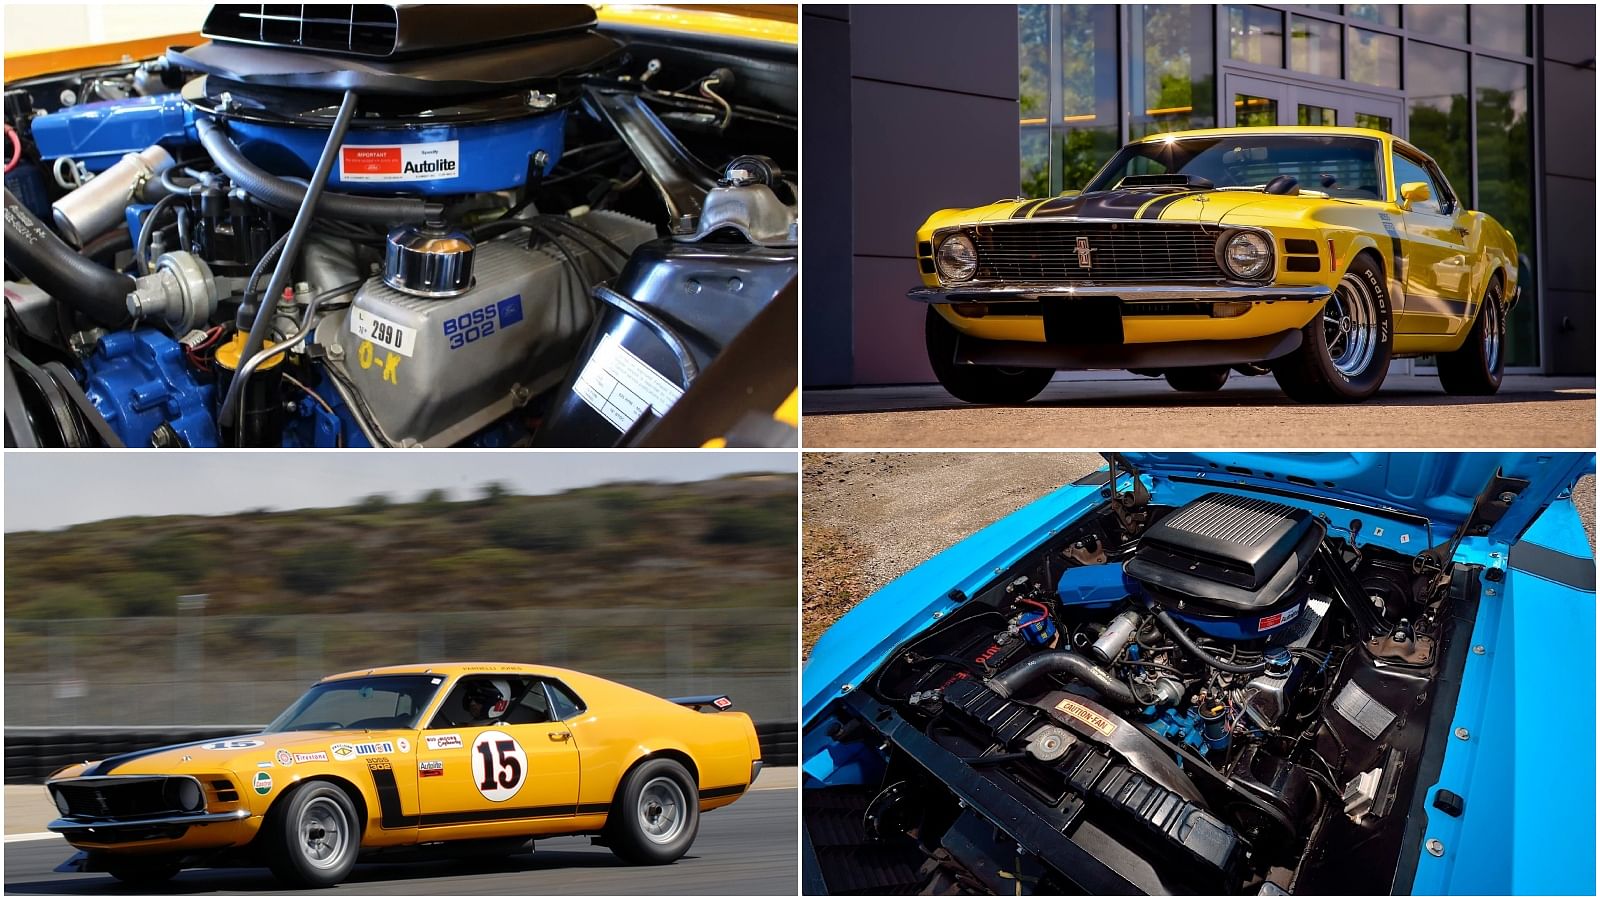 1970 Ford Boss 302 Mustang in Yellow Exterior, 1970 Ford Boss 302 Mustang engine